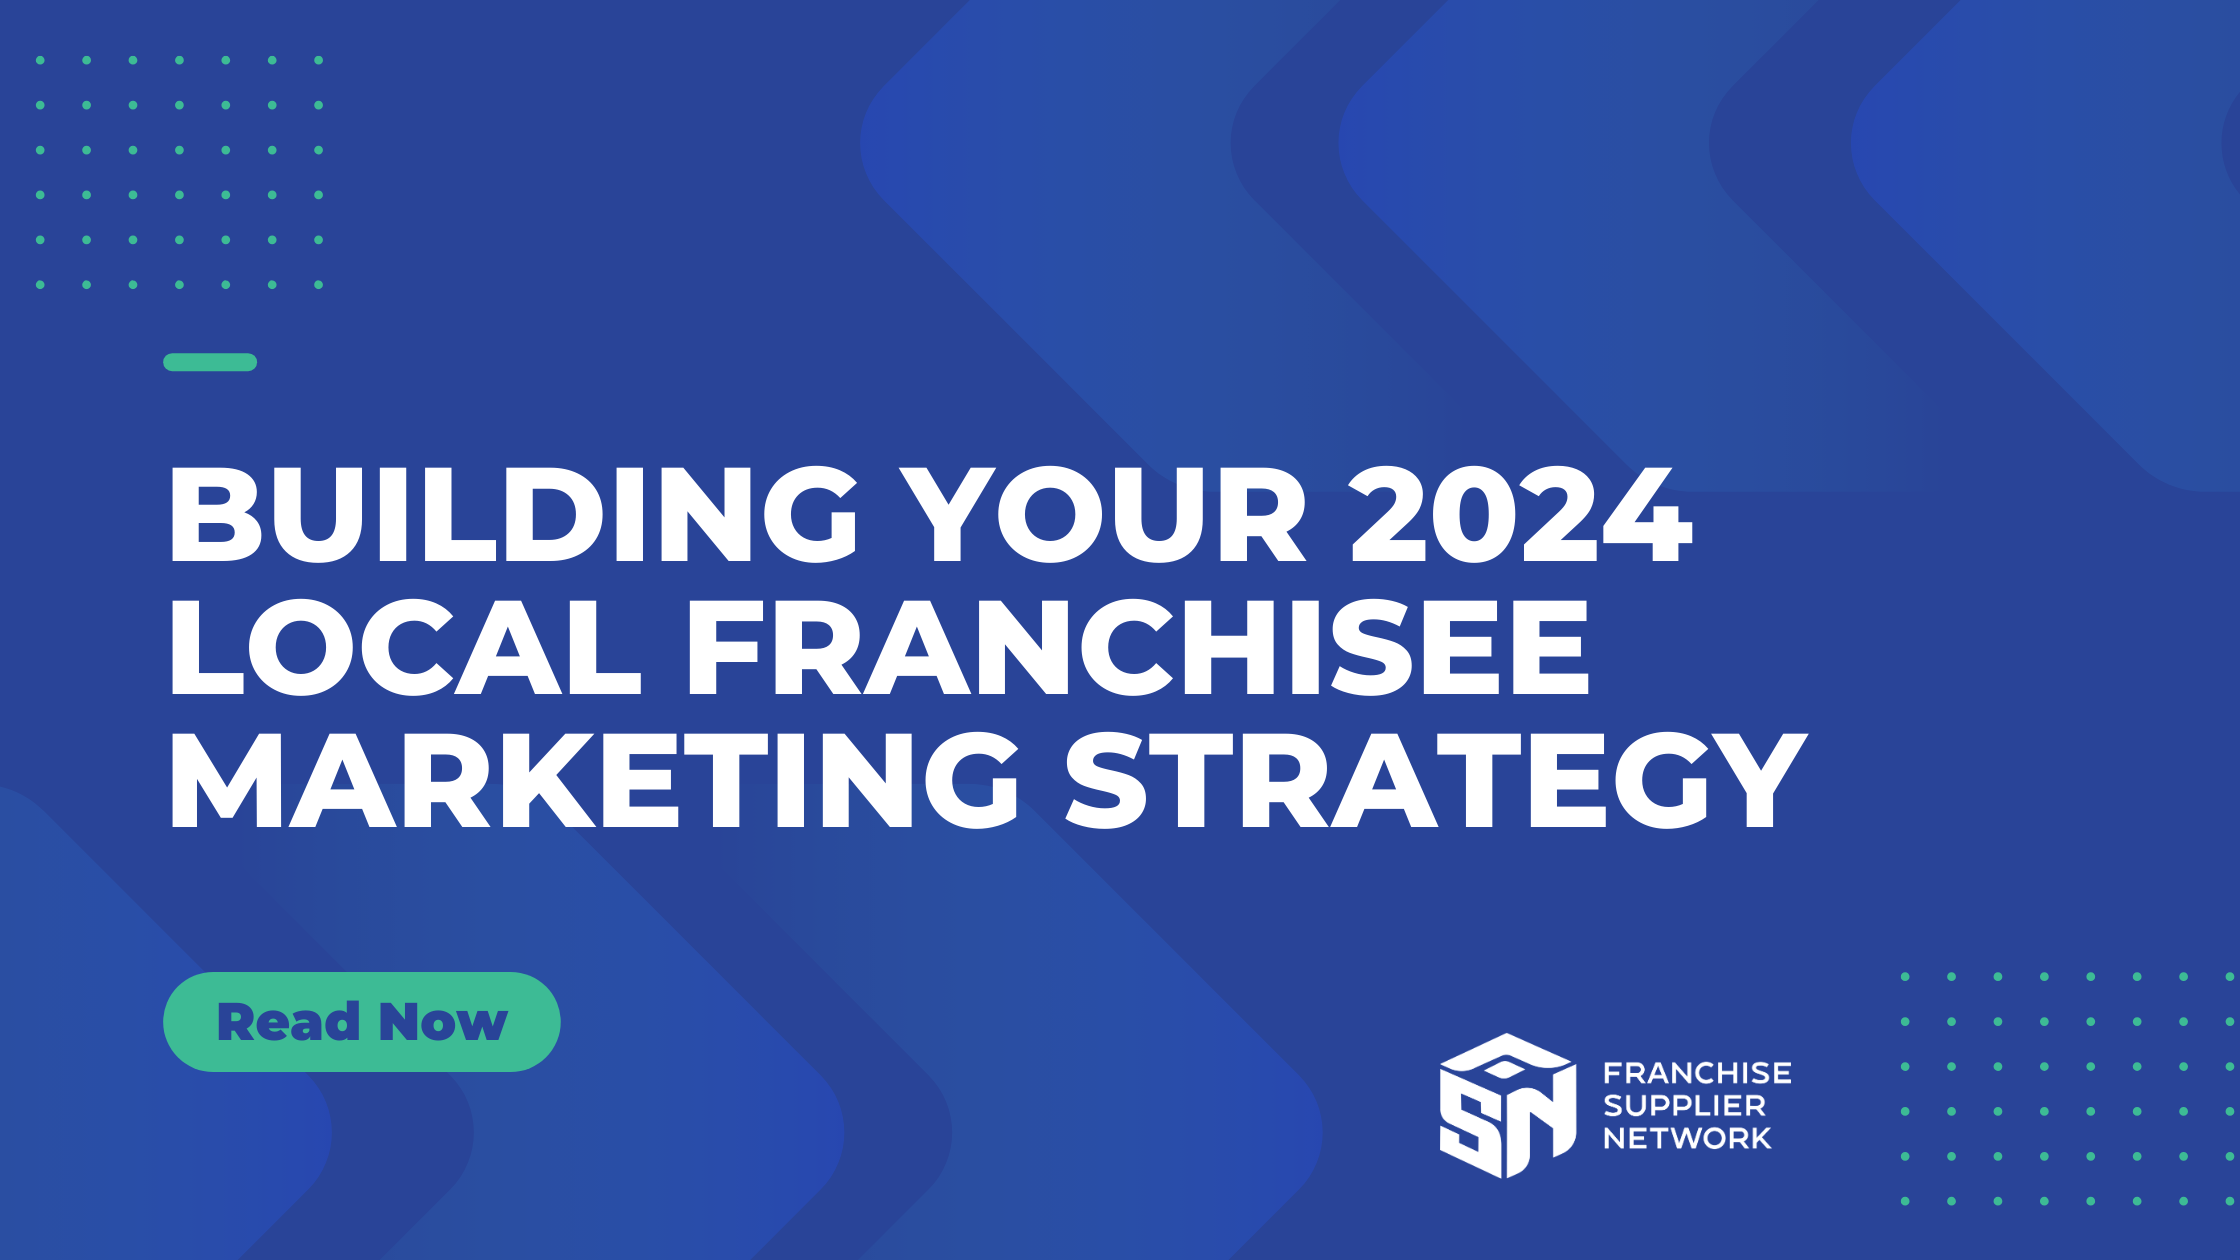 Building Your 2024 Local franchisee Marketing Strategy